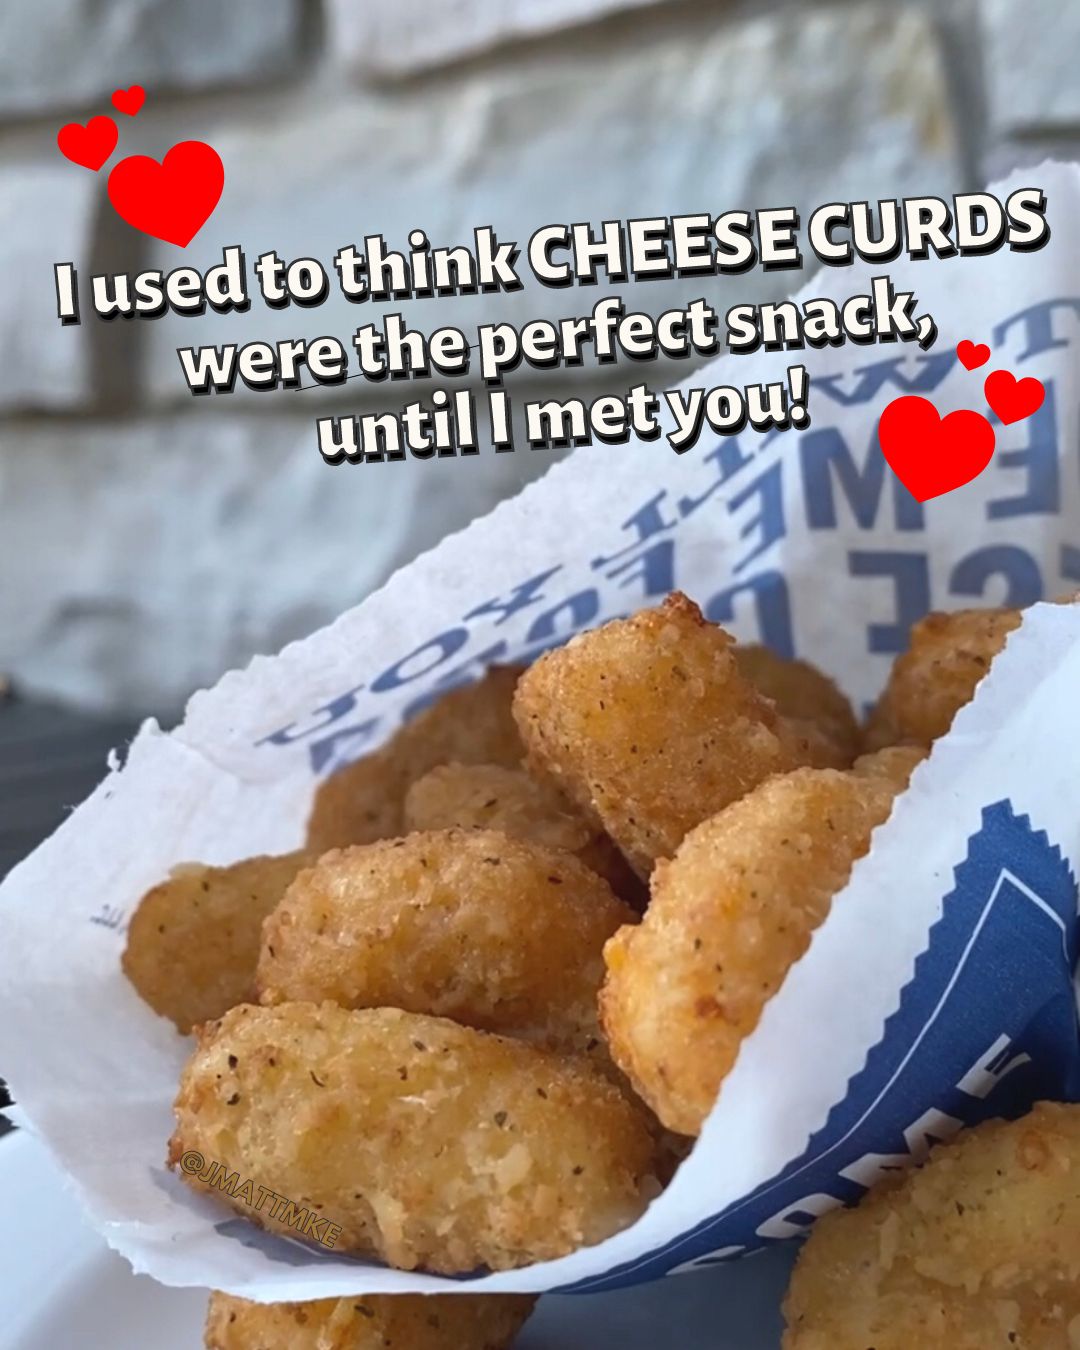 “I used to think Cheese Curds were the perfect snack until I met you!”